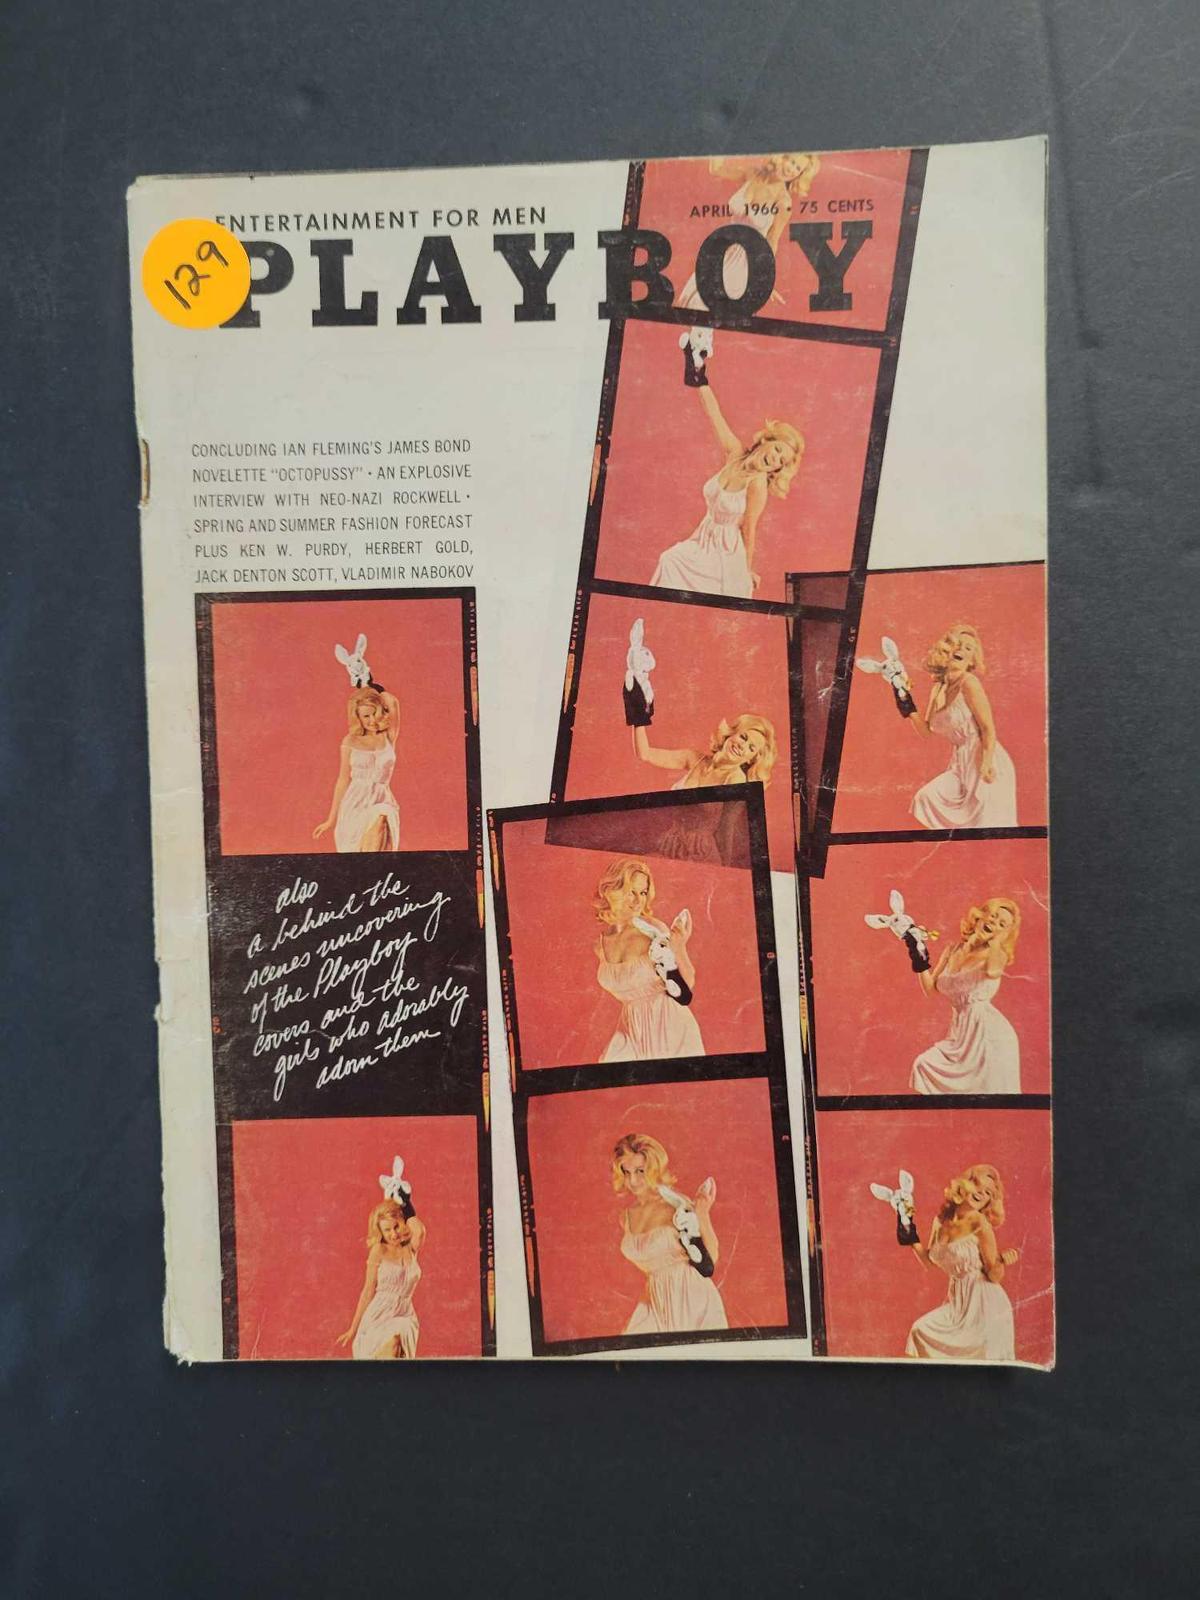 ADULTS ONLY! Vintage Playboy April 1966 $1 STS